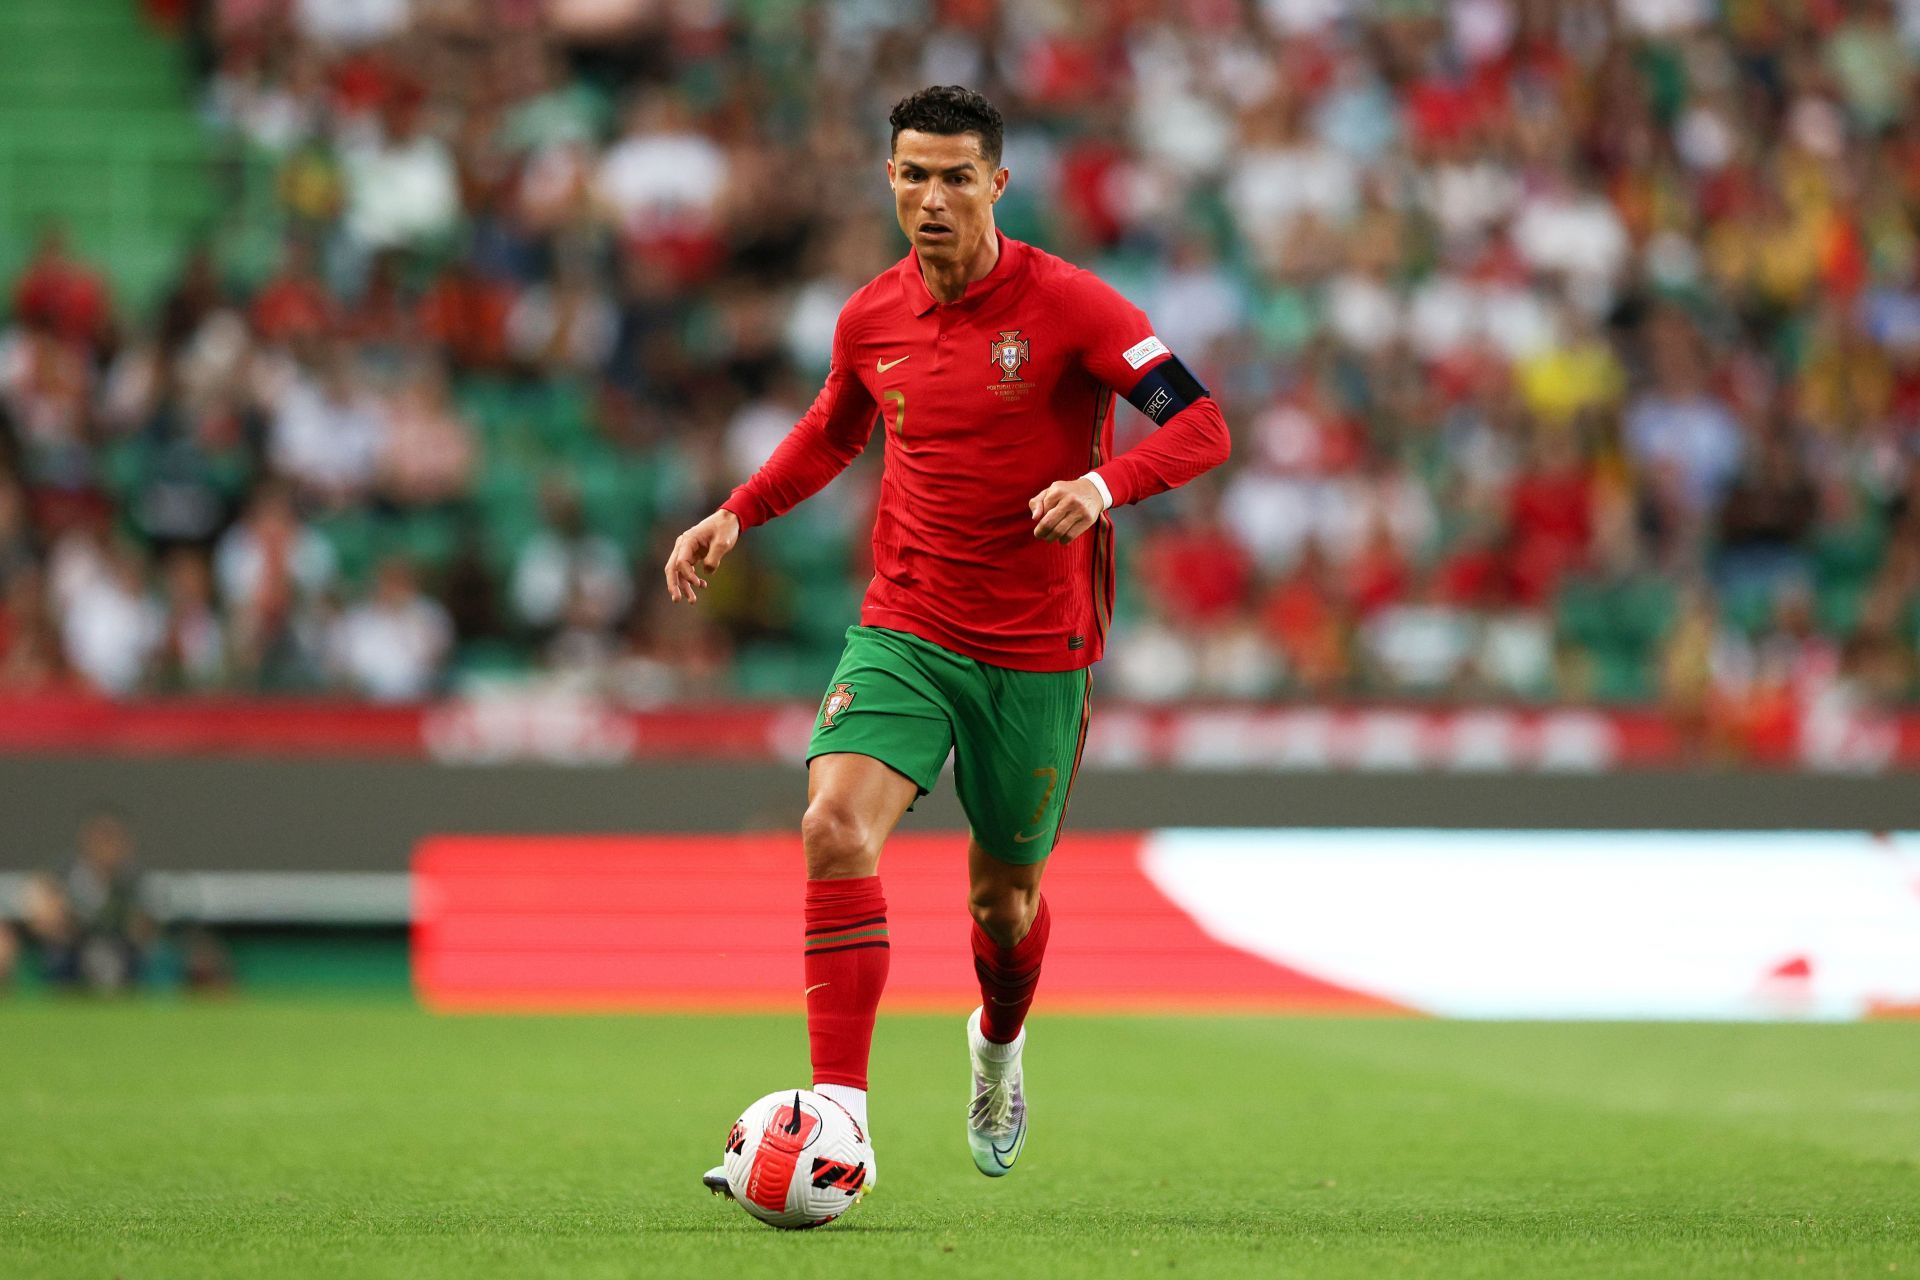 Portugal take on Switzerland this weekend, but Ronaldo will not feature